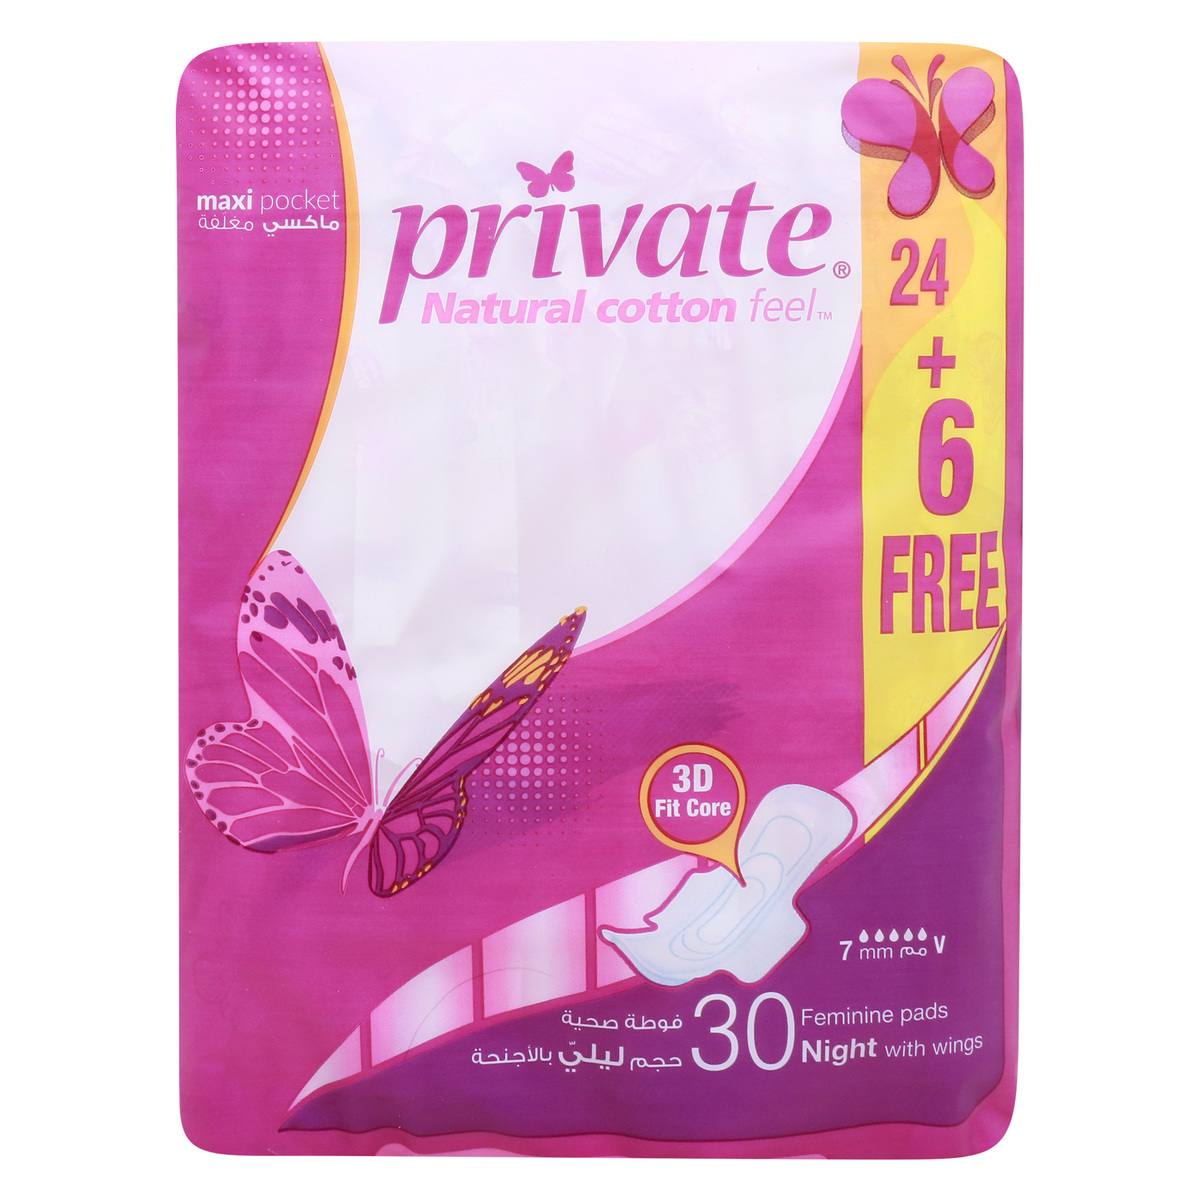 Private Natural Cotton Feel Ladies Napkin Night with Wings 24 pcs + 6 pcs